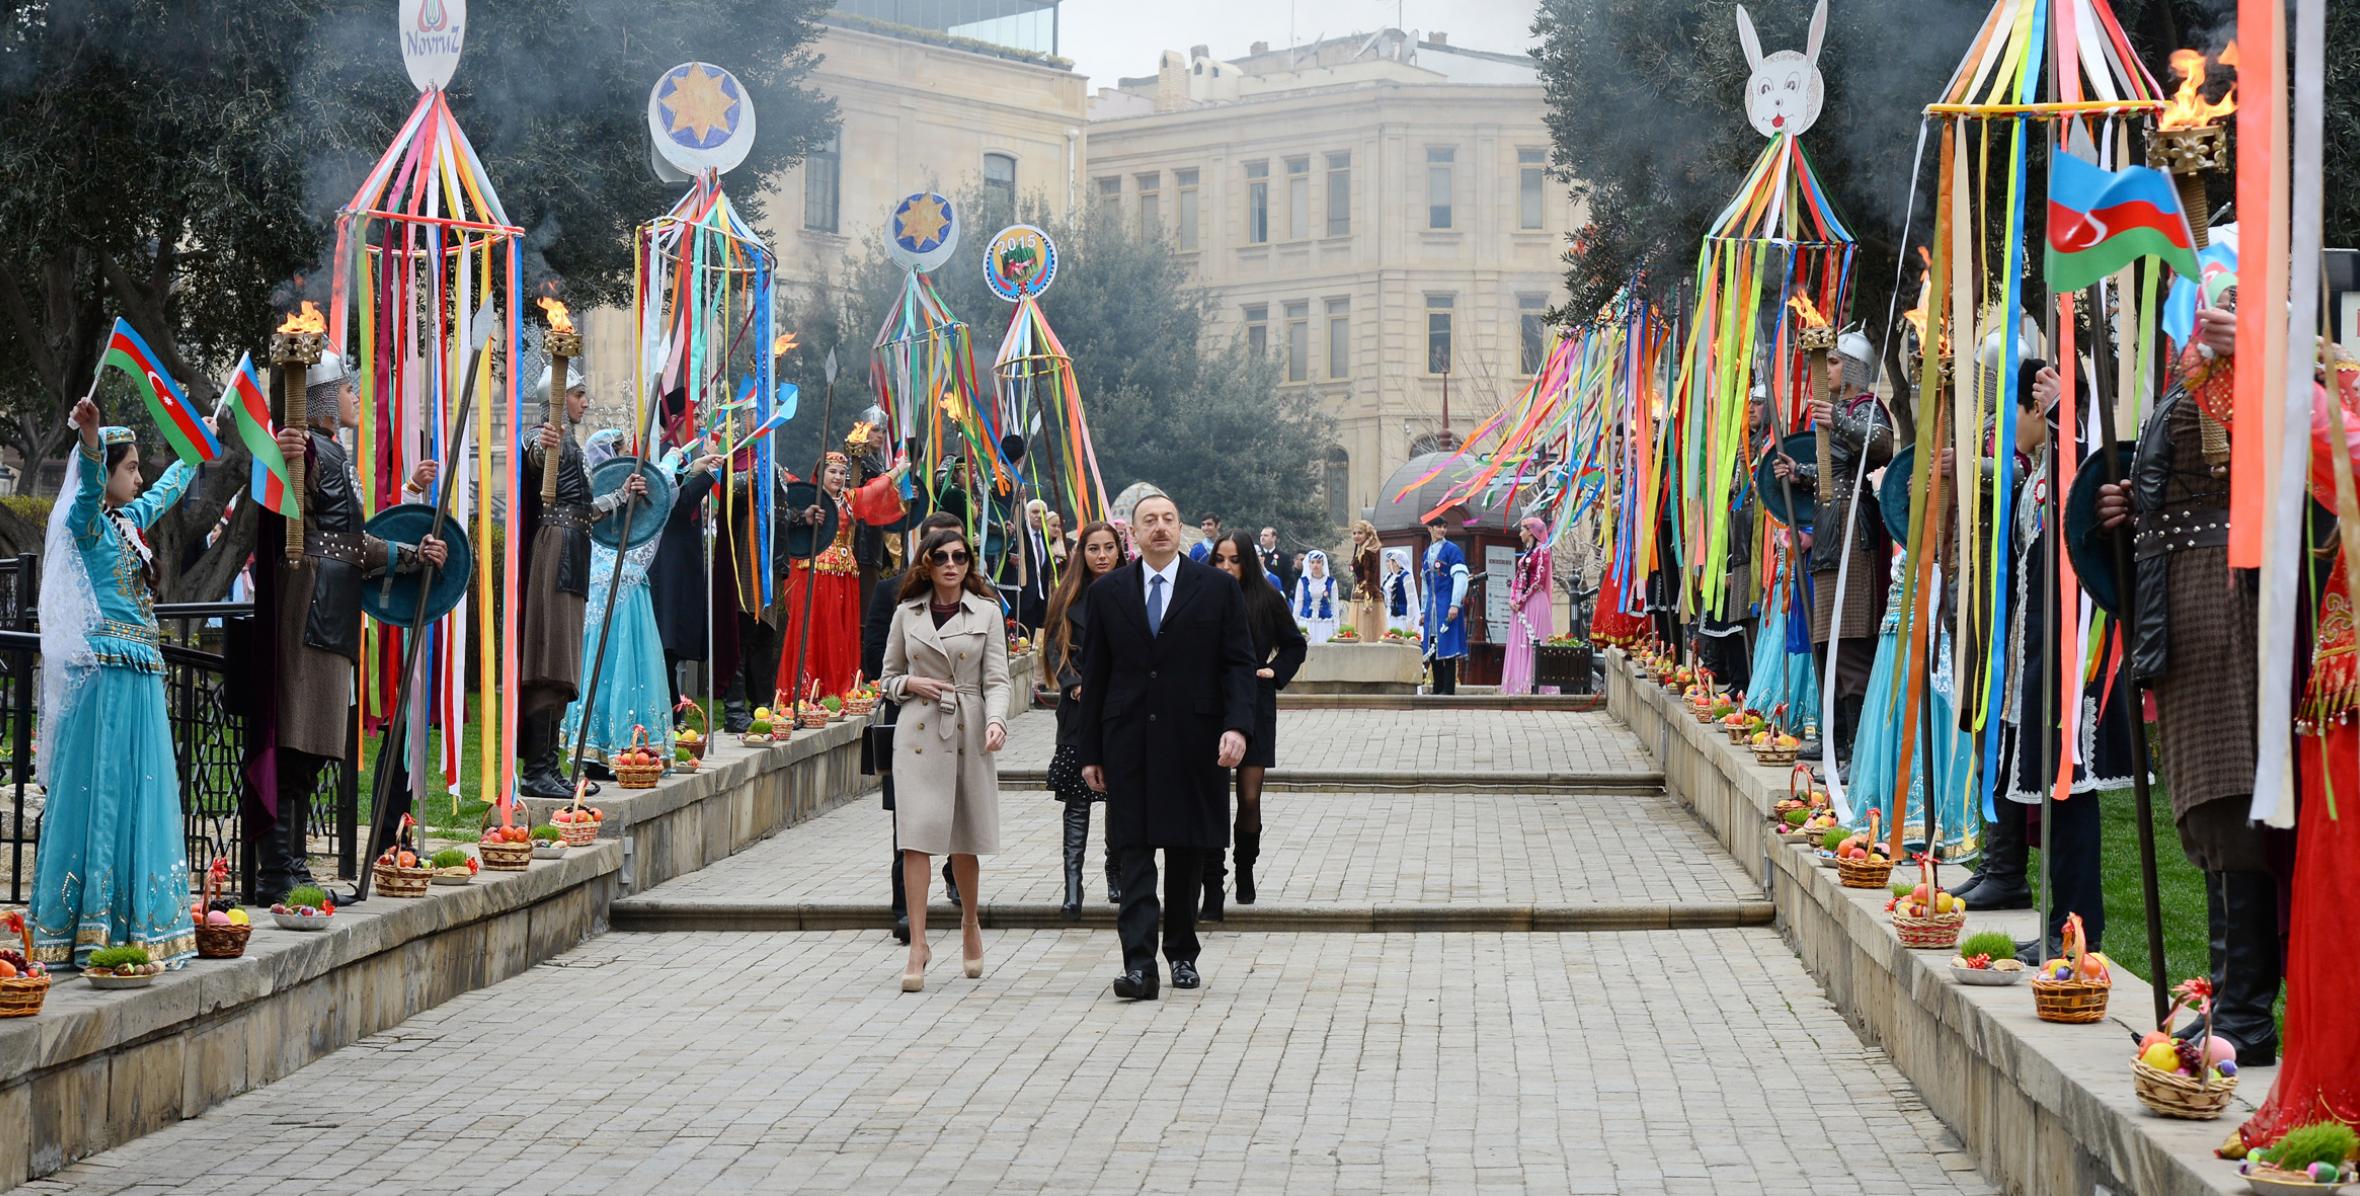 Ilham Aliyev joined nationwide festivities on the occasion of Novruz holiday